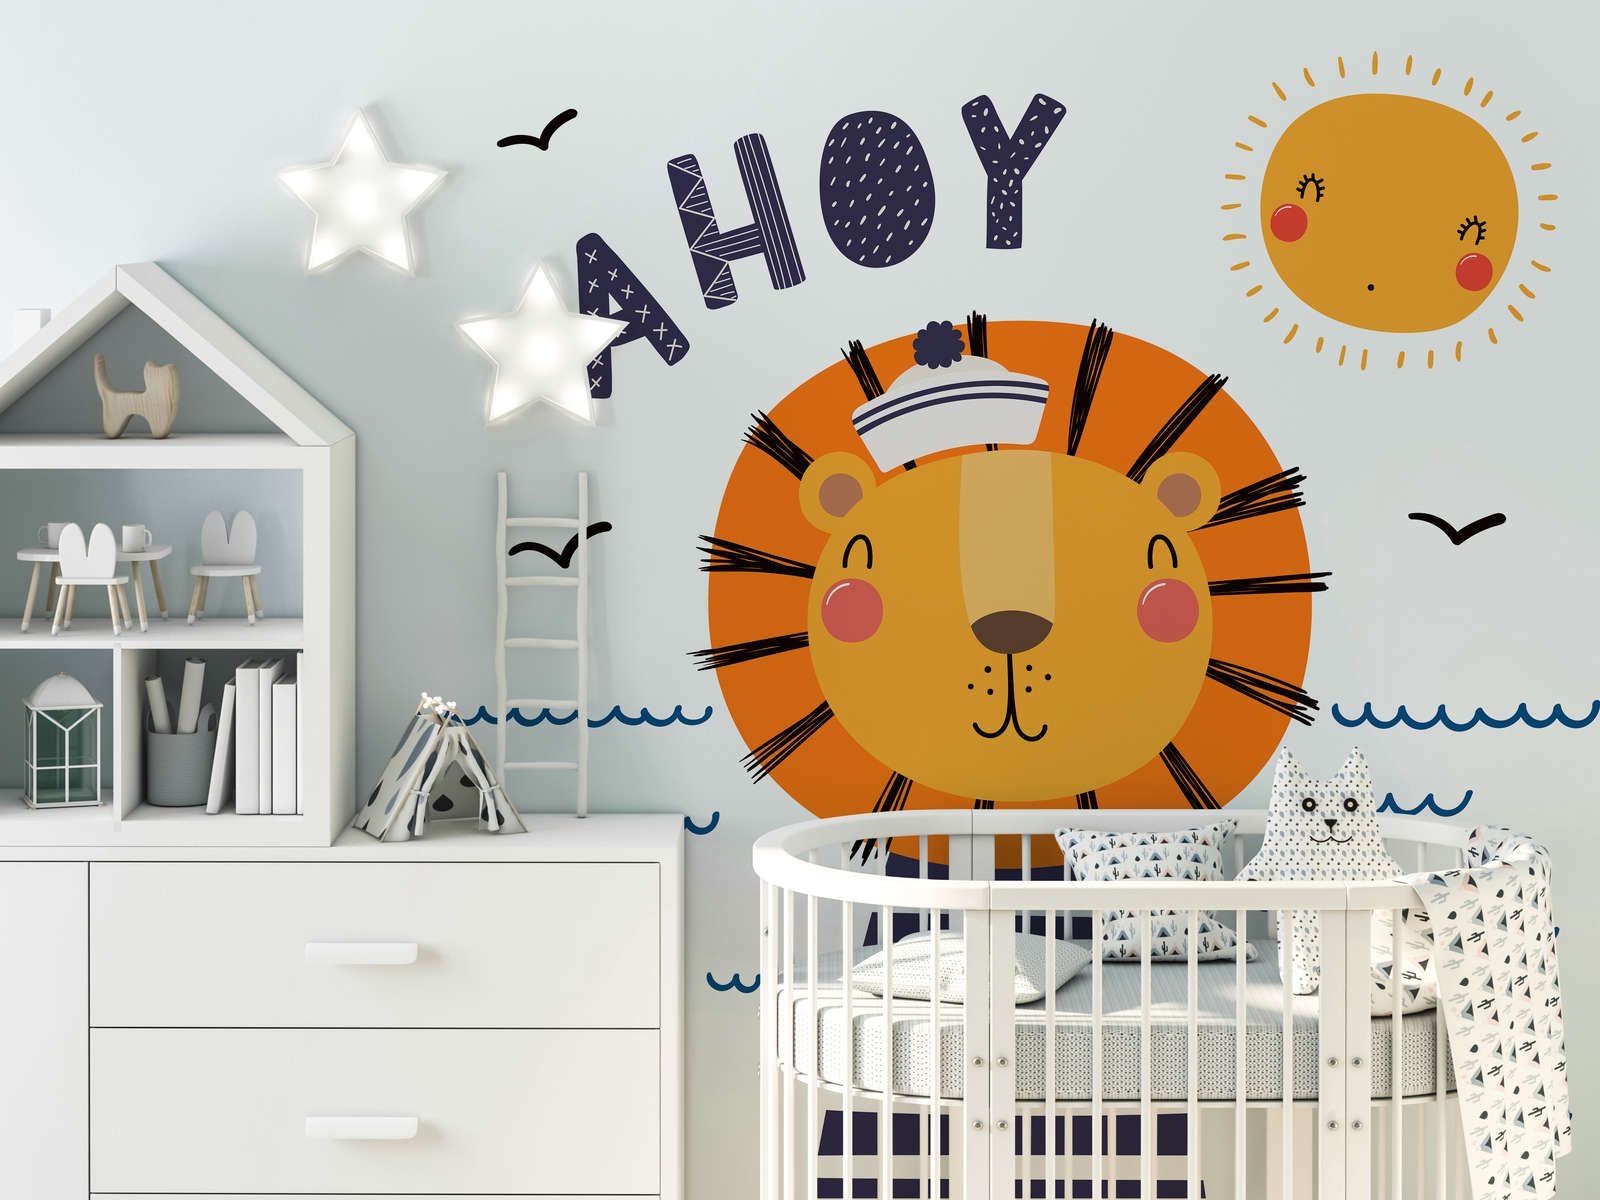             Nursery mural with lion pirate - Smooth & pearlescent fleece
        